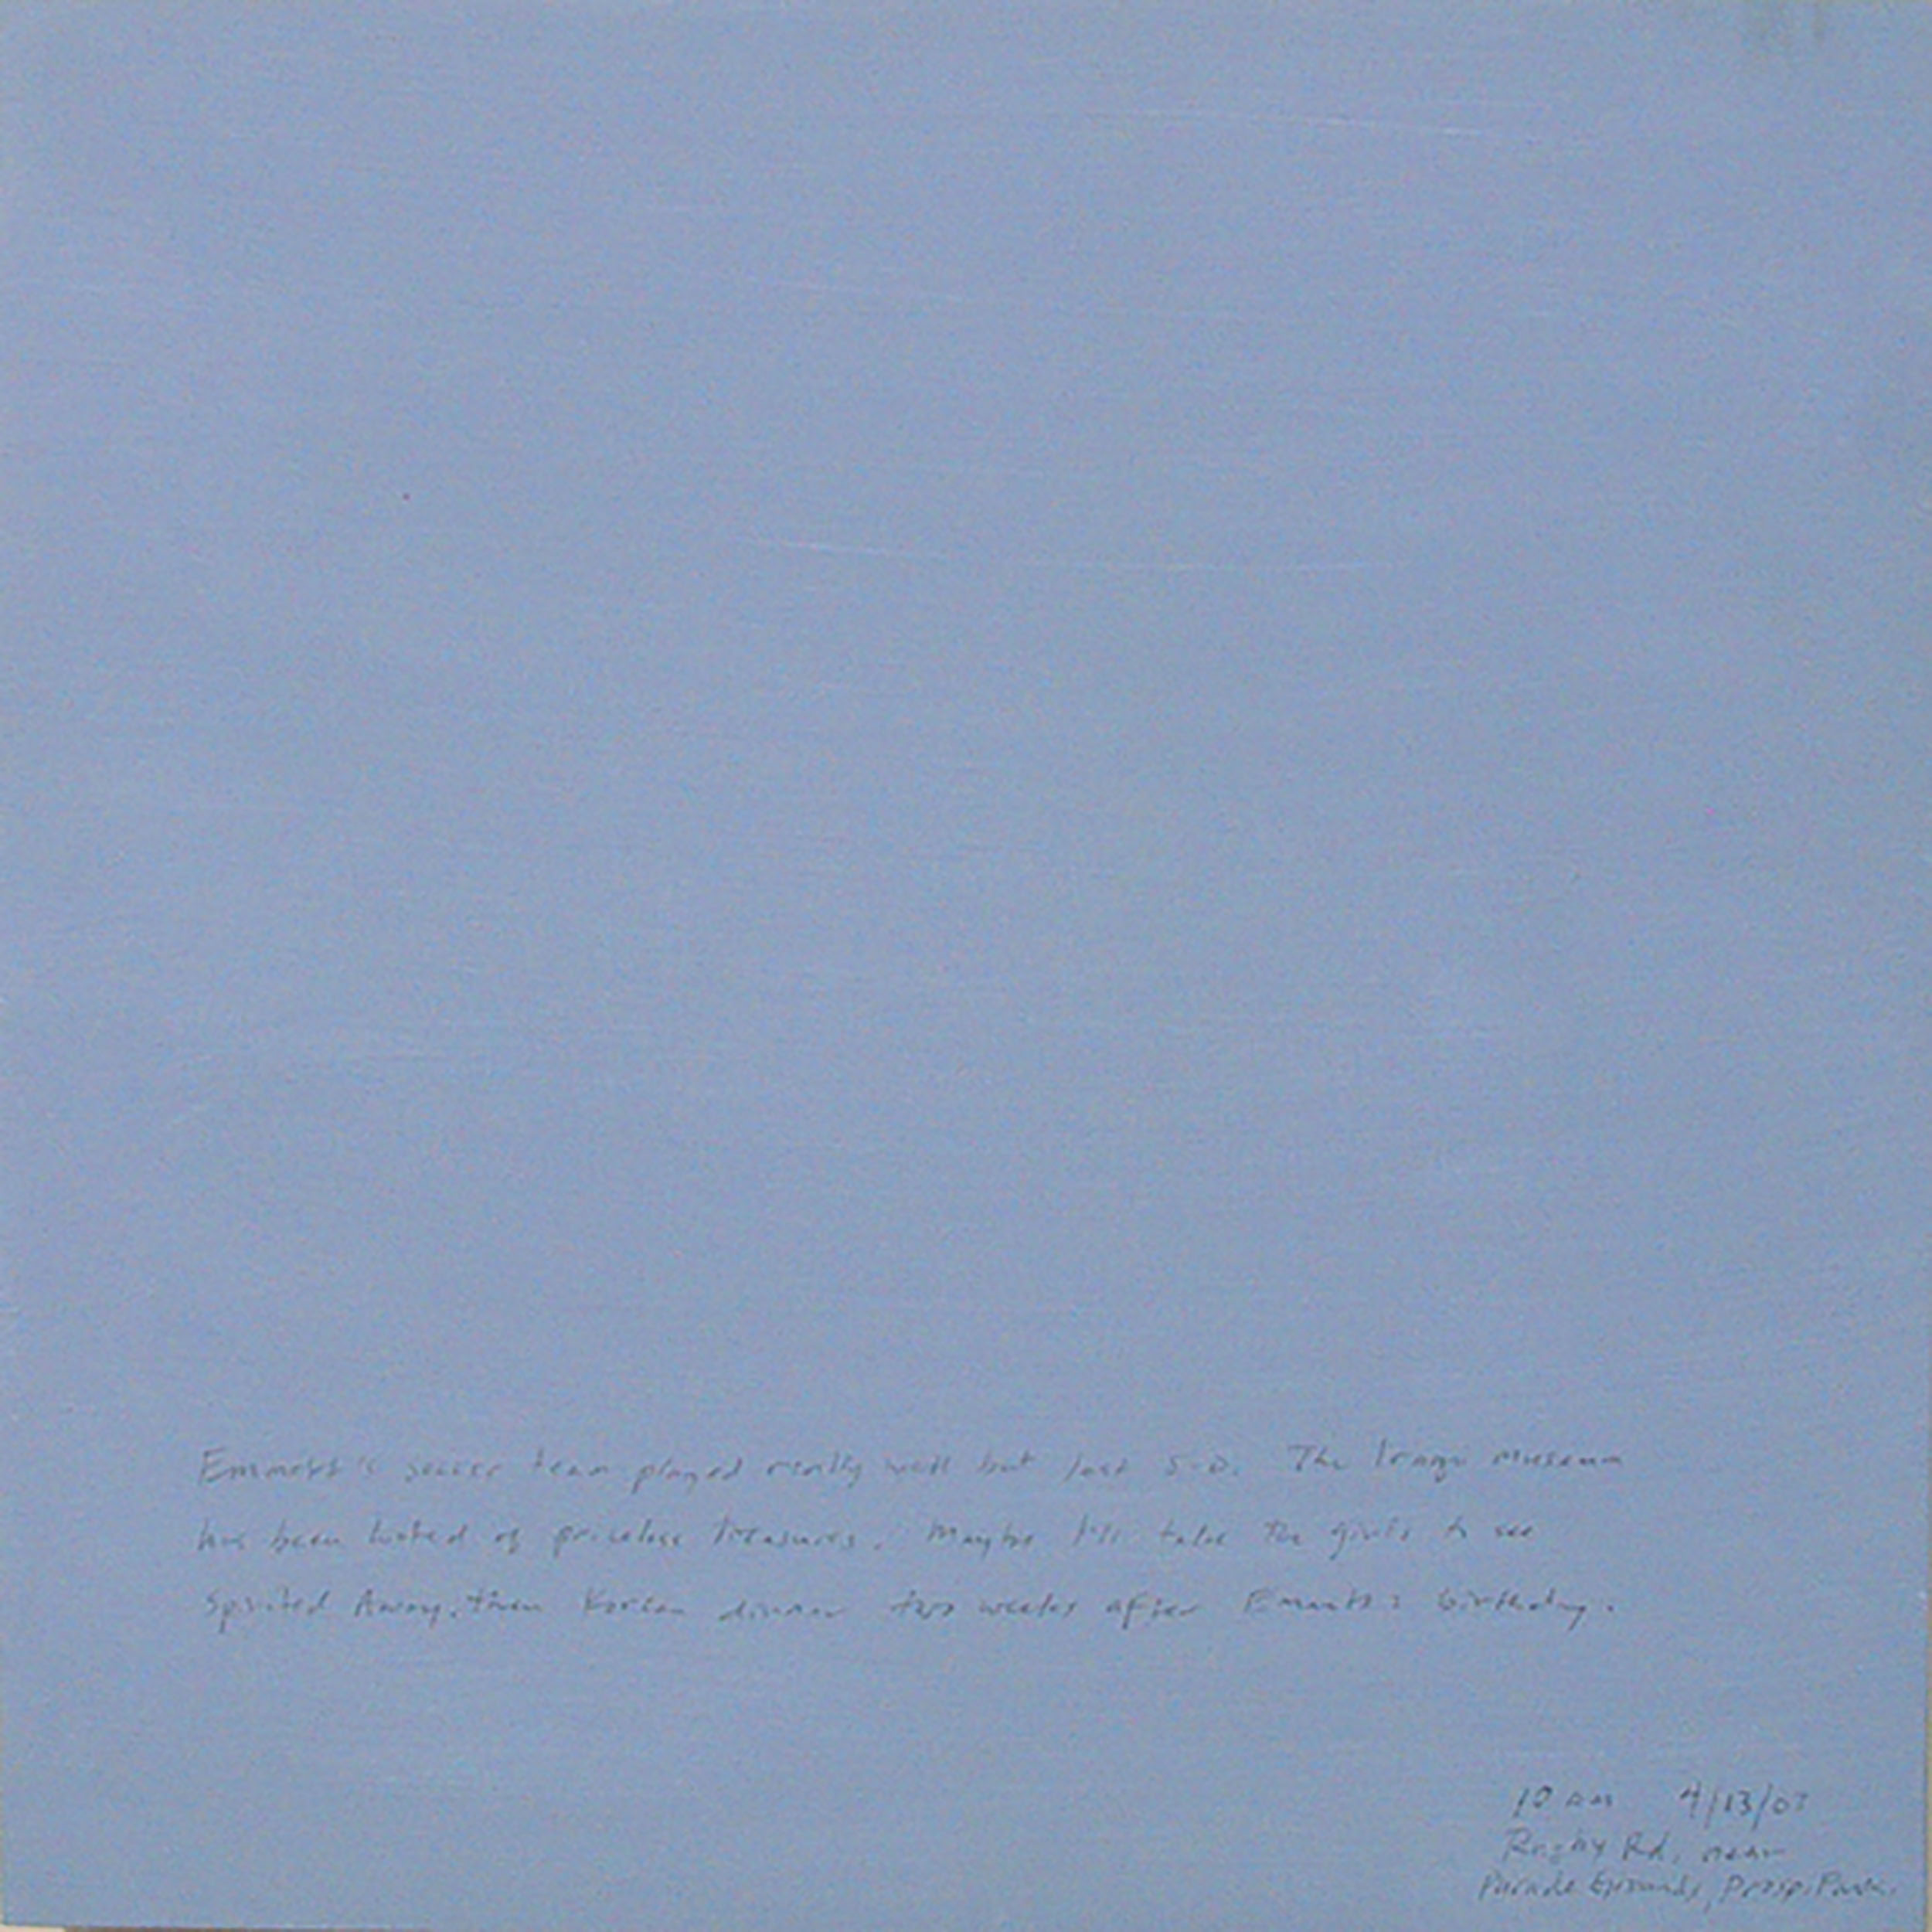 A 14 × 14 inch, acrylic painting of the sky. A journal entry is handwritten on the painting:

“Emmett’s soccer team played really well but lost 5-0. The Iraqi Museum has been looted of priceless treasures. Maybe I’ll take the girls to see Spirited Away, then Korean dinner two weeks after Emmett’s birthday.

10 am  4/13/07  Rugby Rd. near 
Parade Grounds, Prosp. Park”